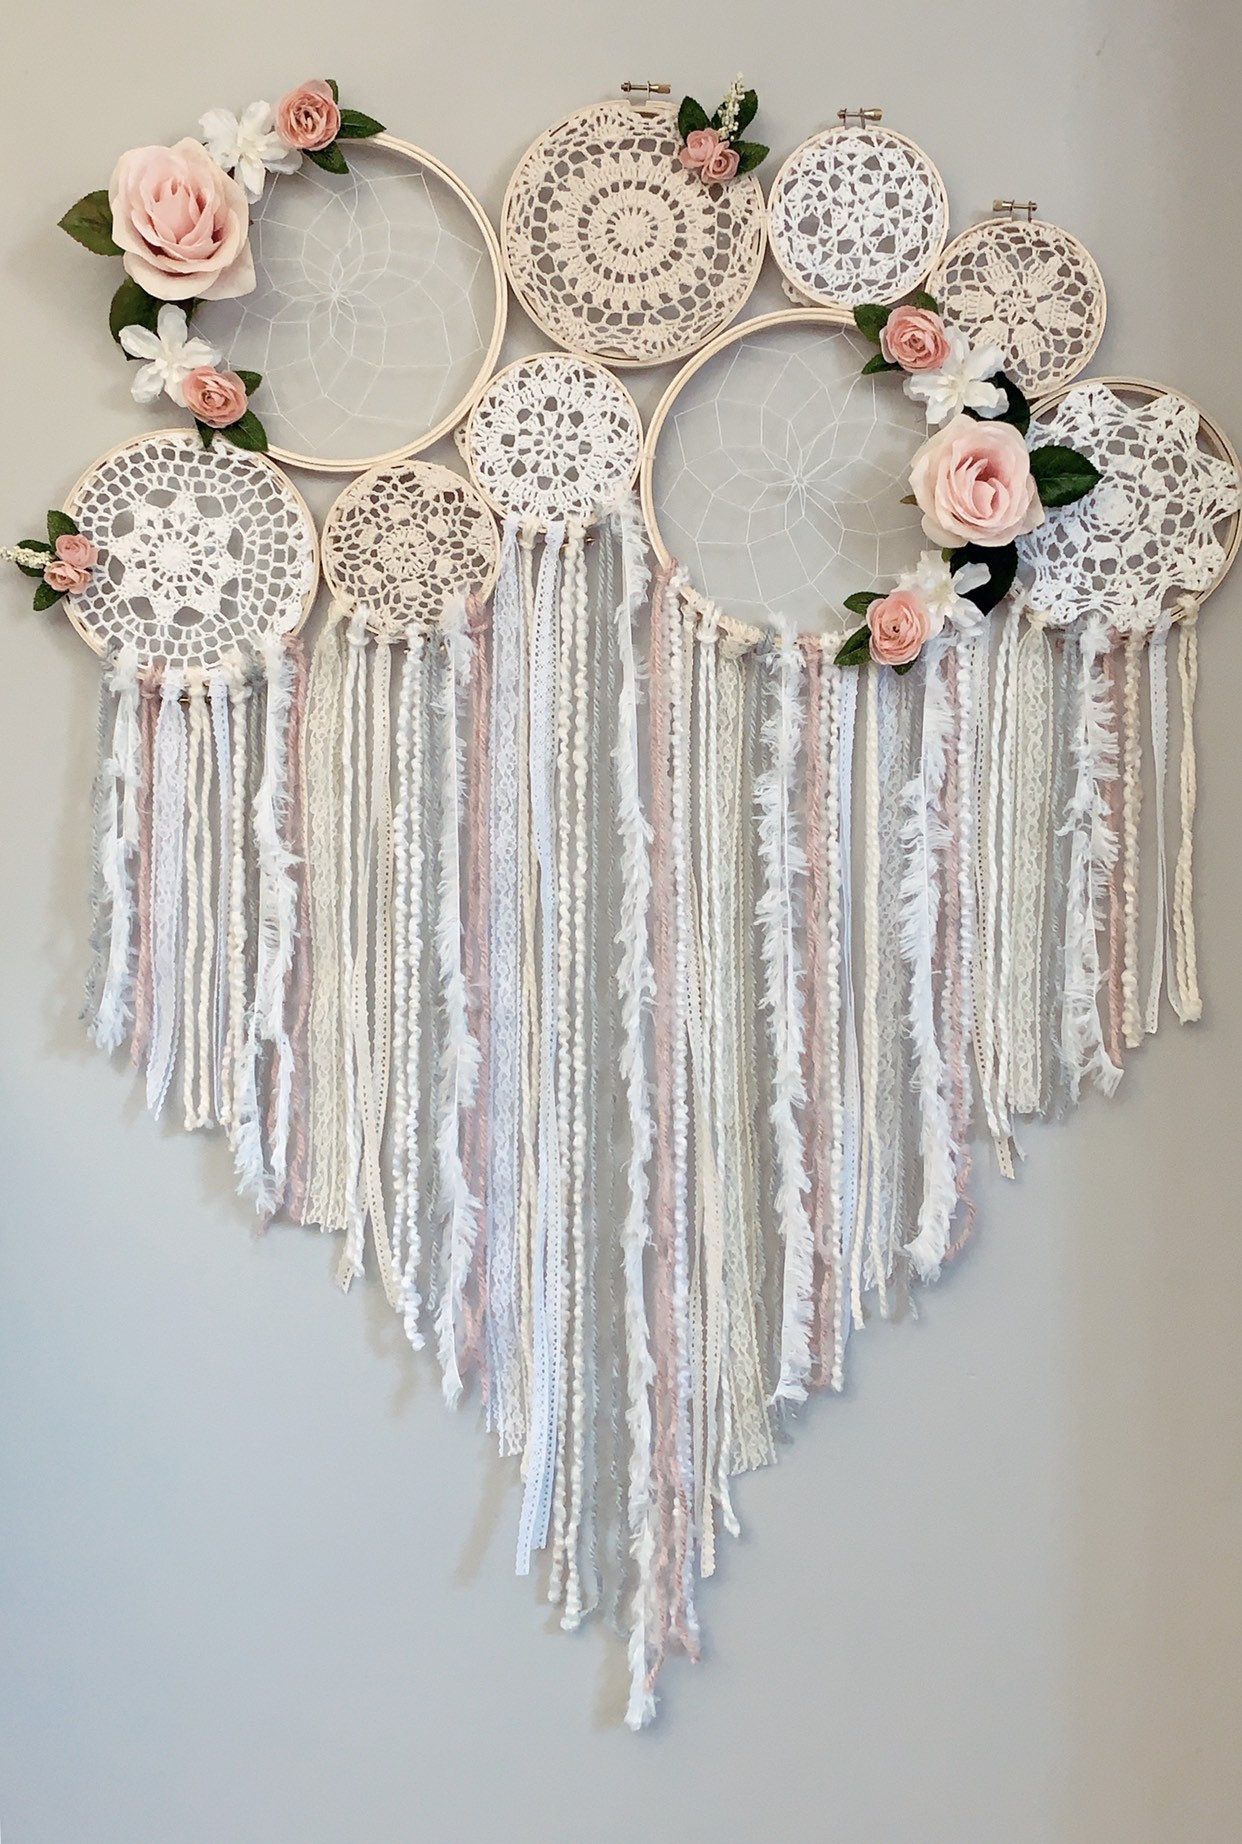 Floral dream catcher collage/mural - Floral dream catcher collage/mural -   18 diy Dream Catcher white ideas